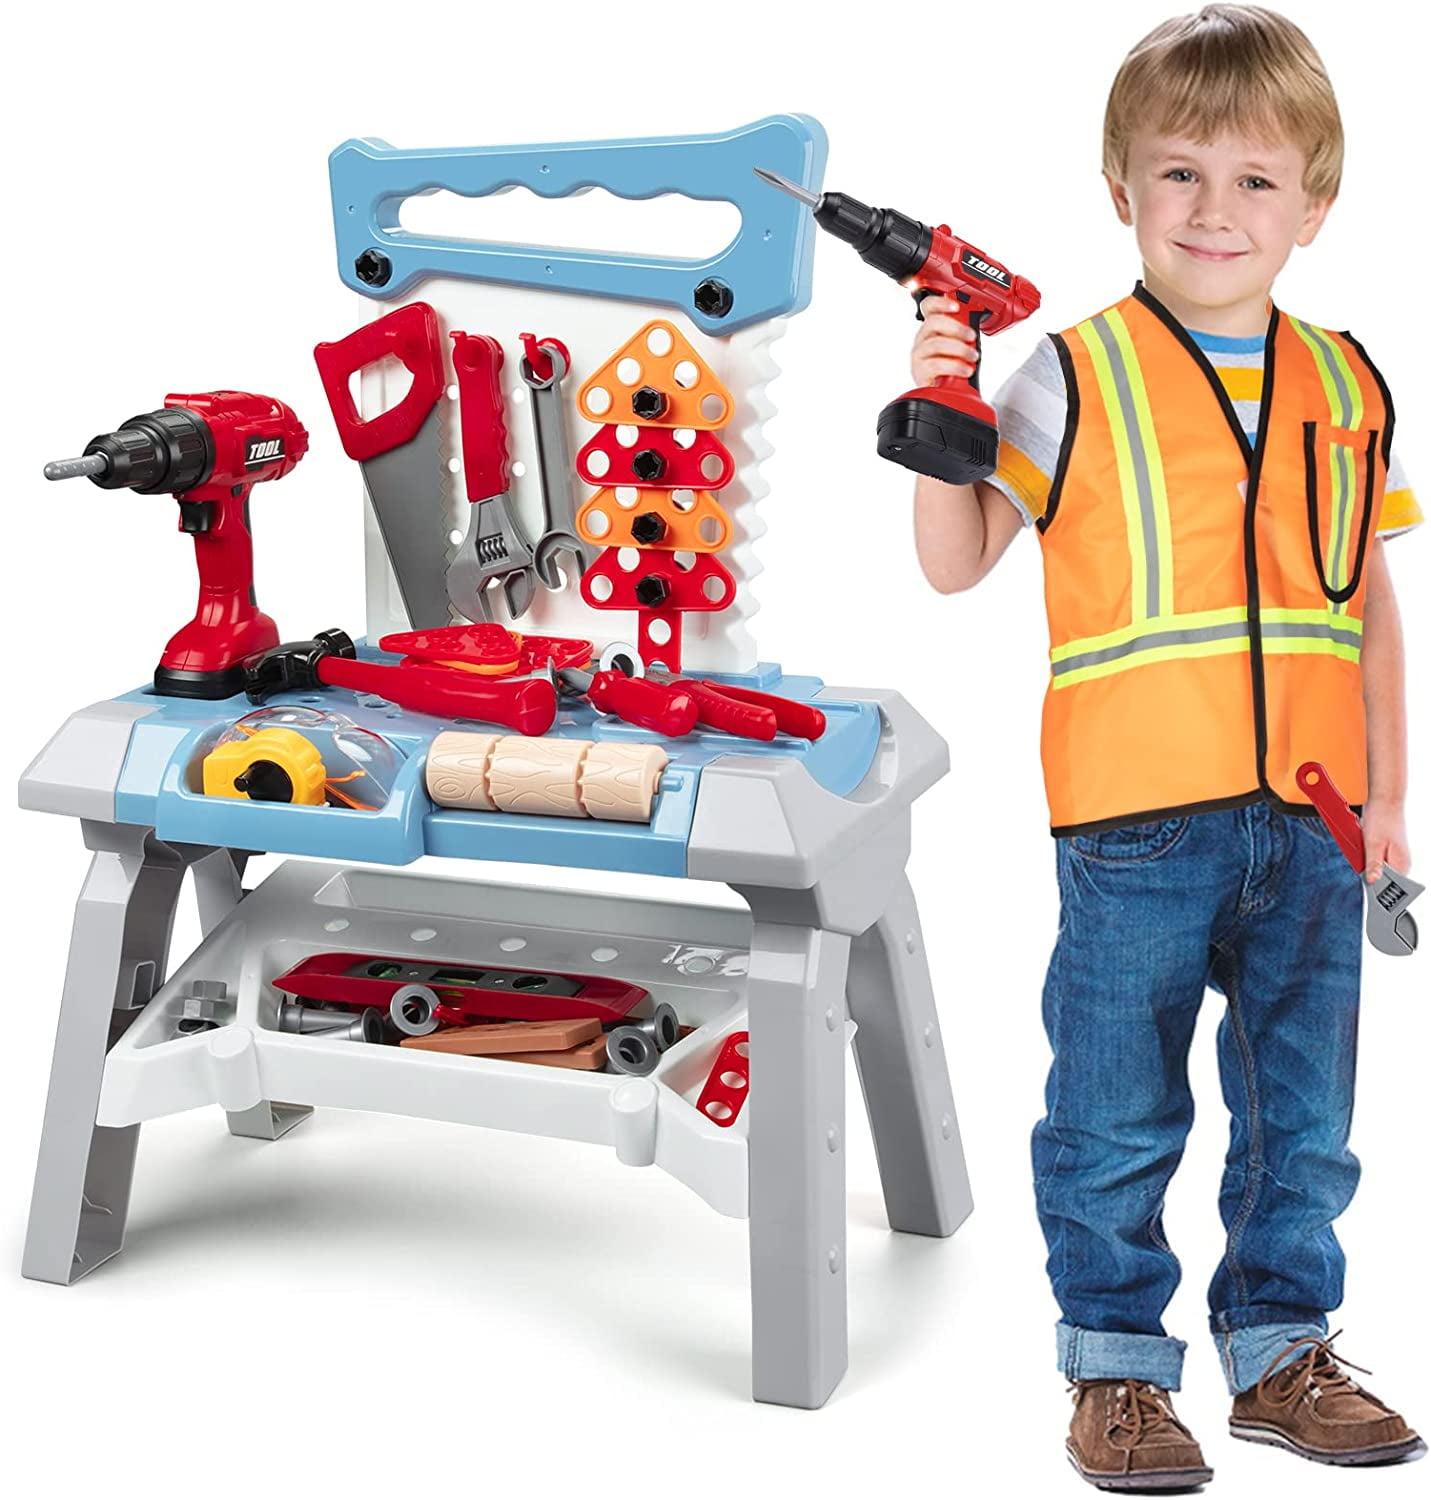 Black & Decker Kids Power Tool Bench Workshop Extra Tools for Sale